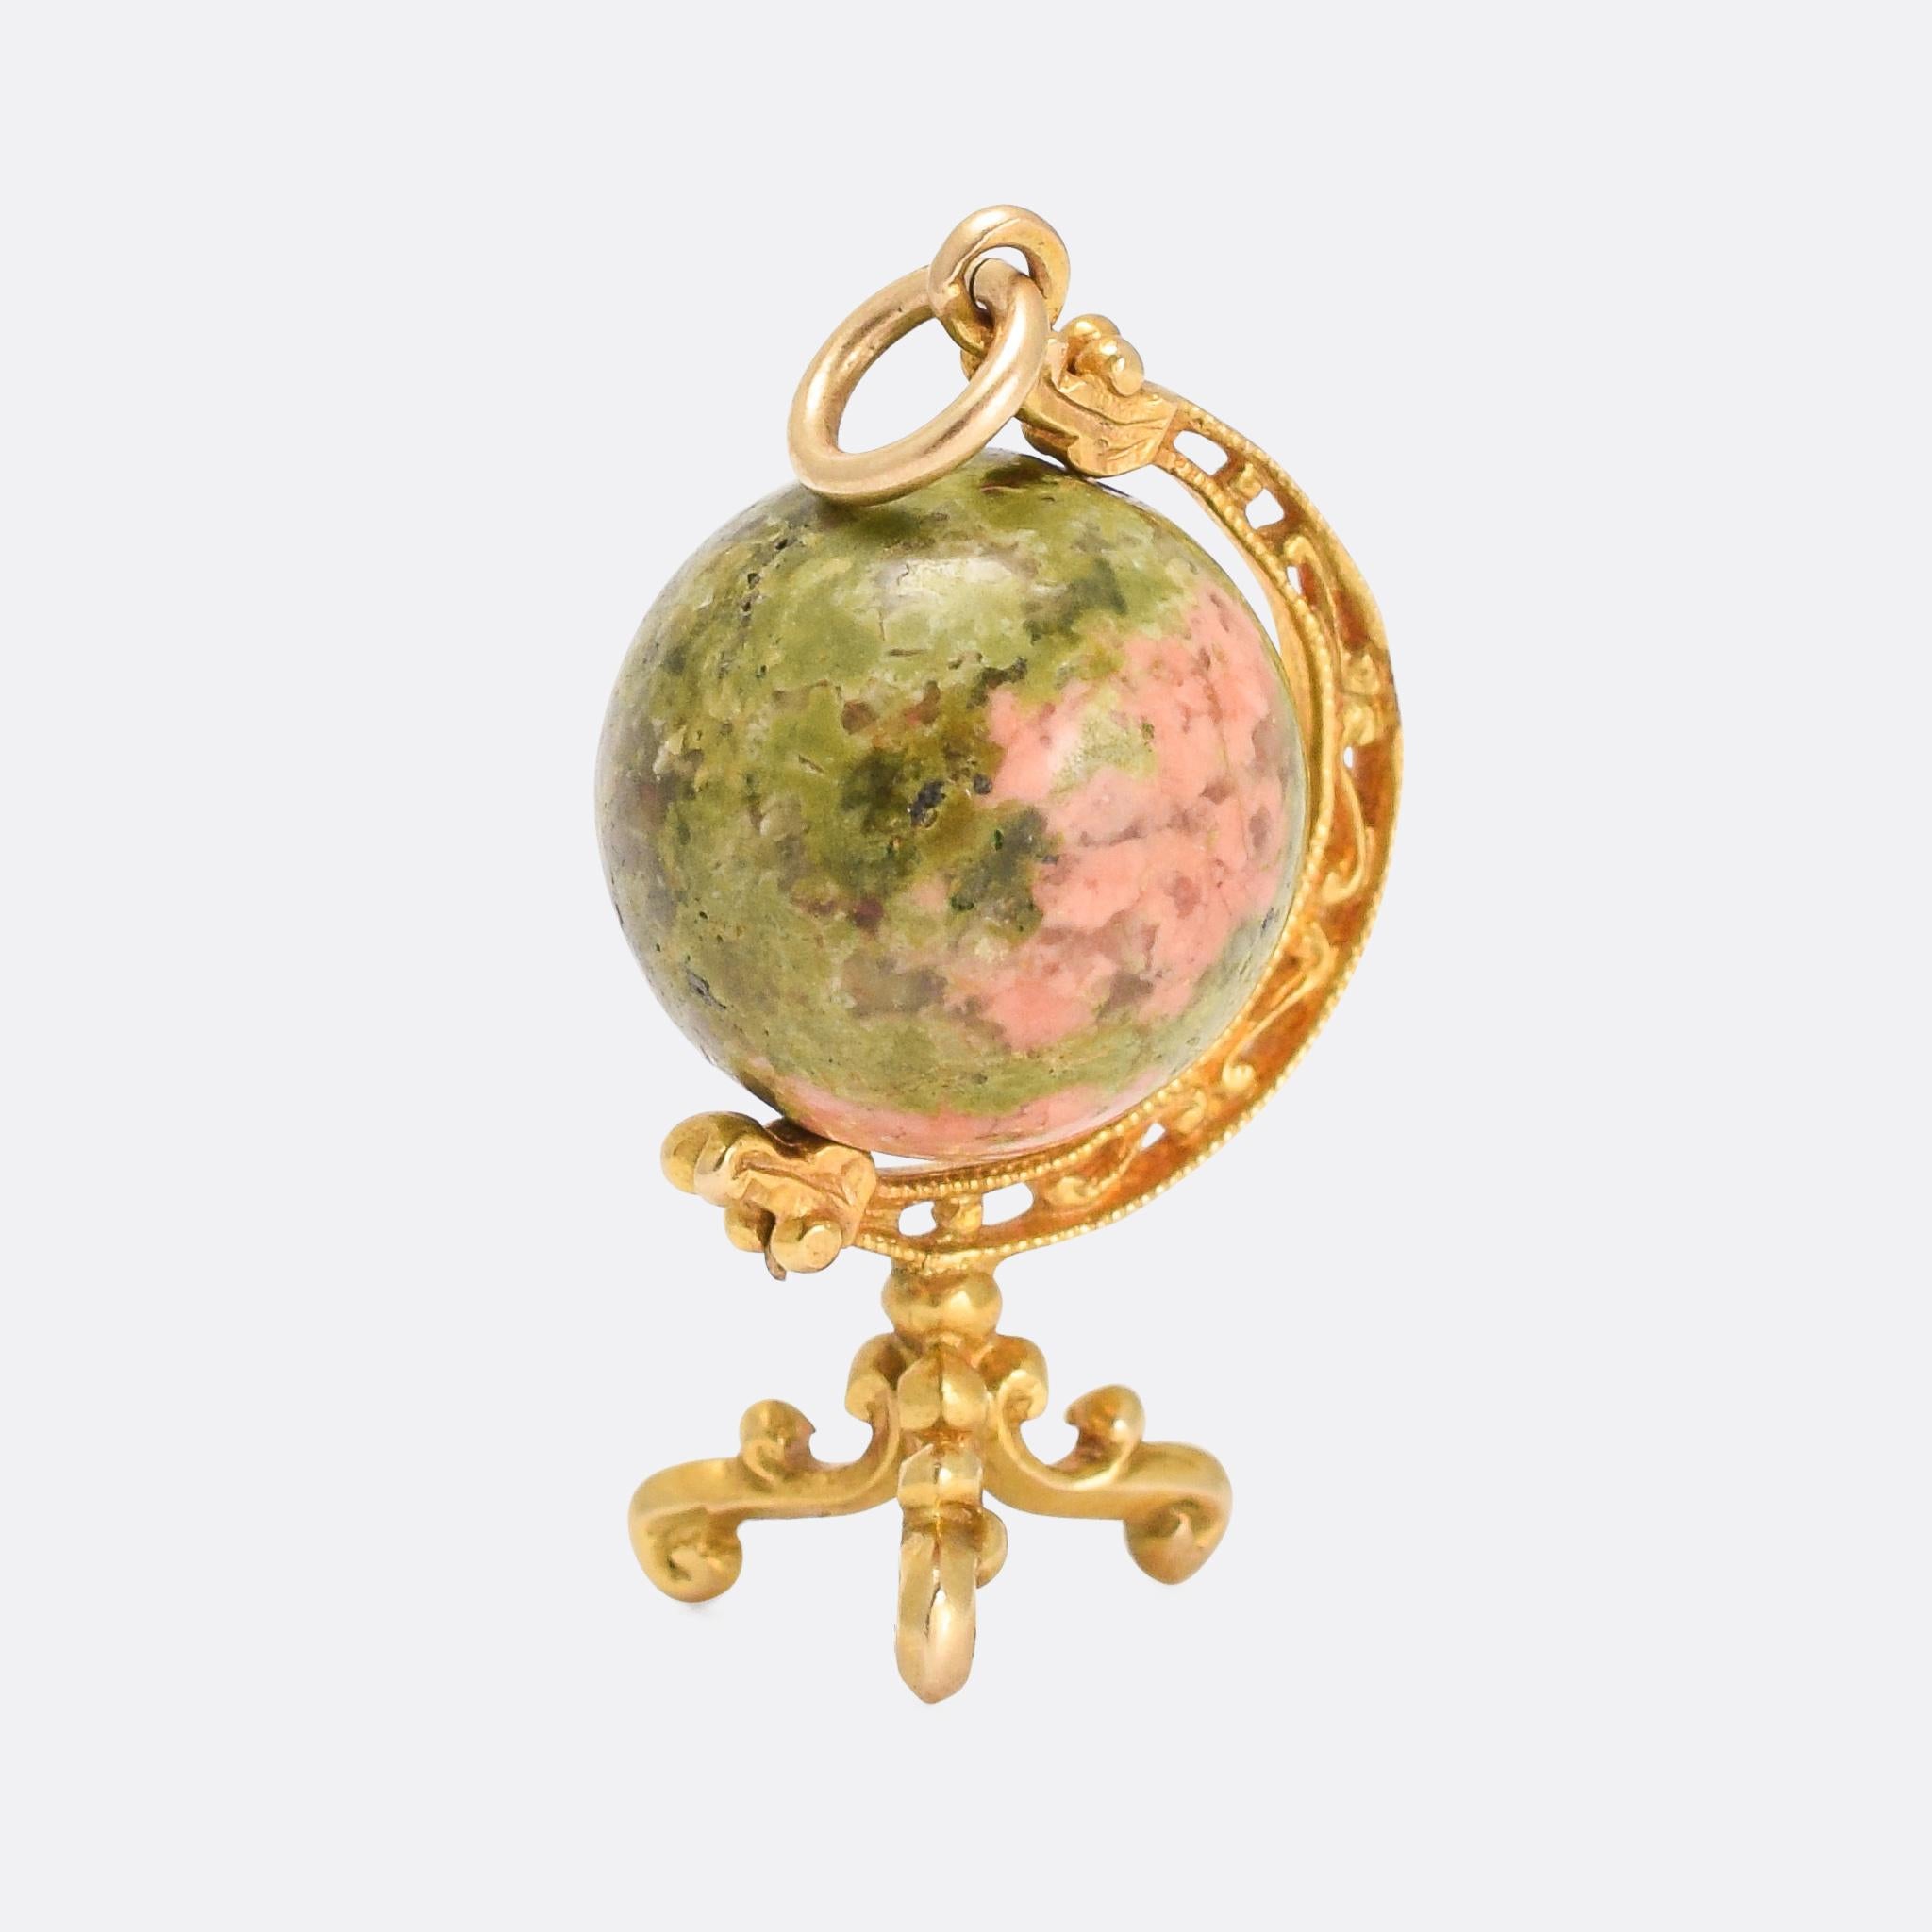 A cool and unusual antique globe pendant dating from the mid-19th Century. The Earth is represented by a sphere of green and pink unakite jasper, cleverly selected to that the pink parts look like the landmasses, and the green parts the oceans. The